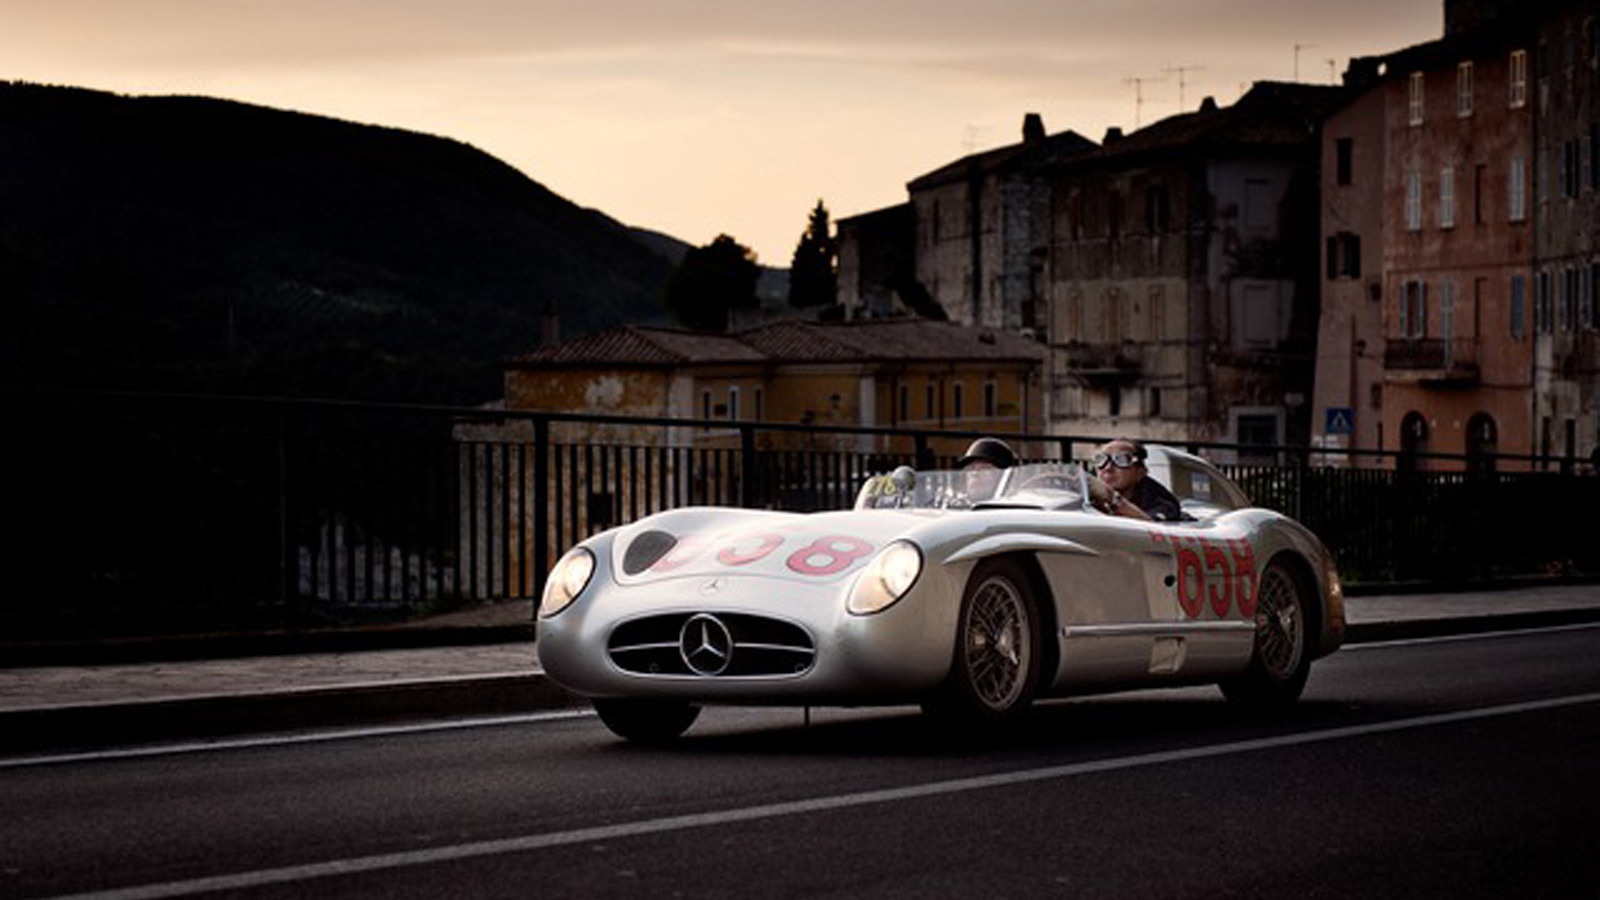 Mercedes-Benz at the Mille Miglia